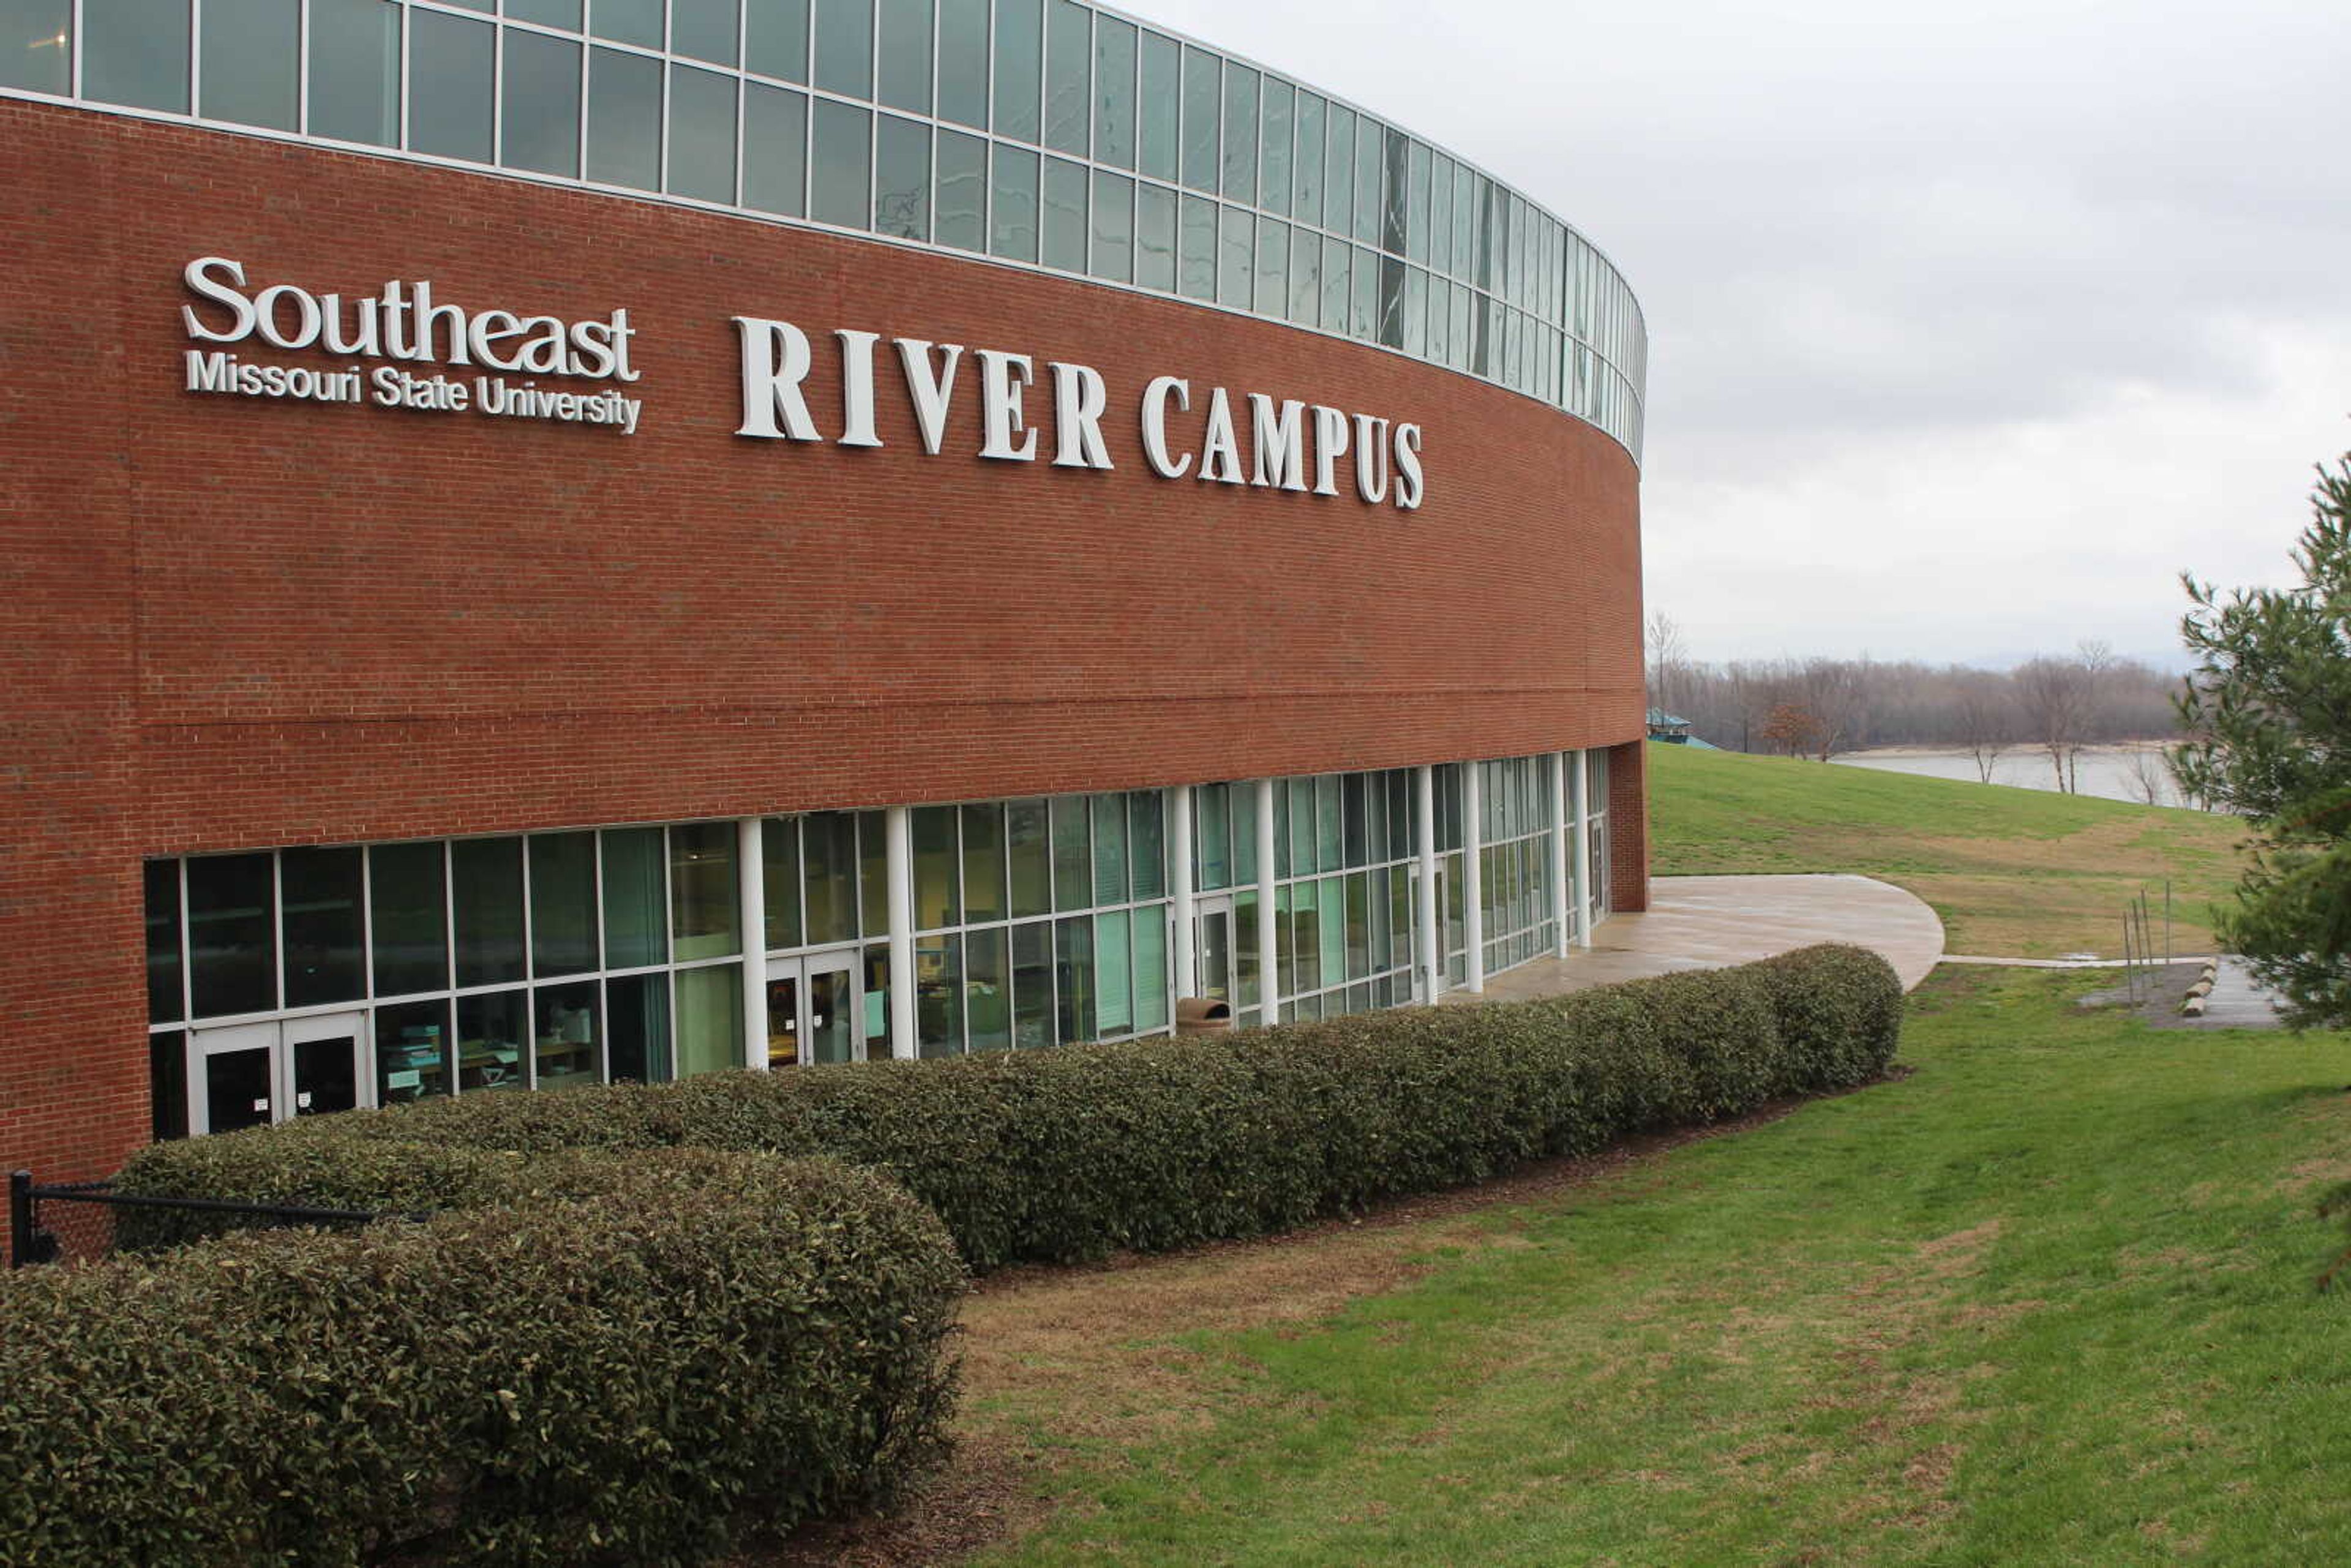 'A Tribute to River Campus' will play to celebrate the 10th Anniversary of River Campus